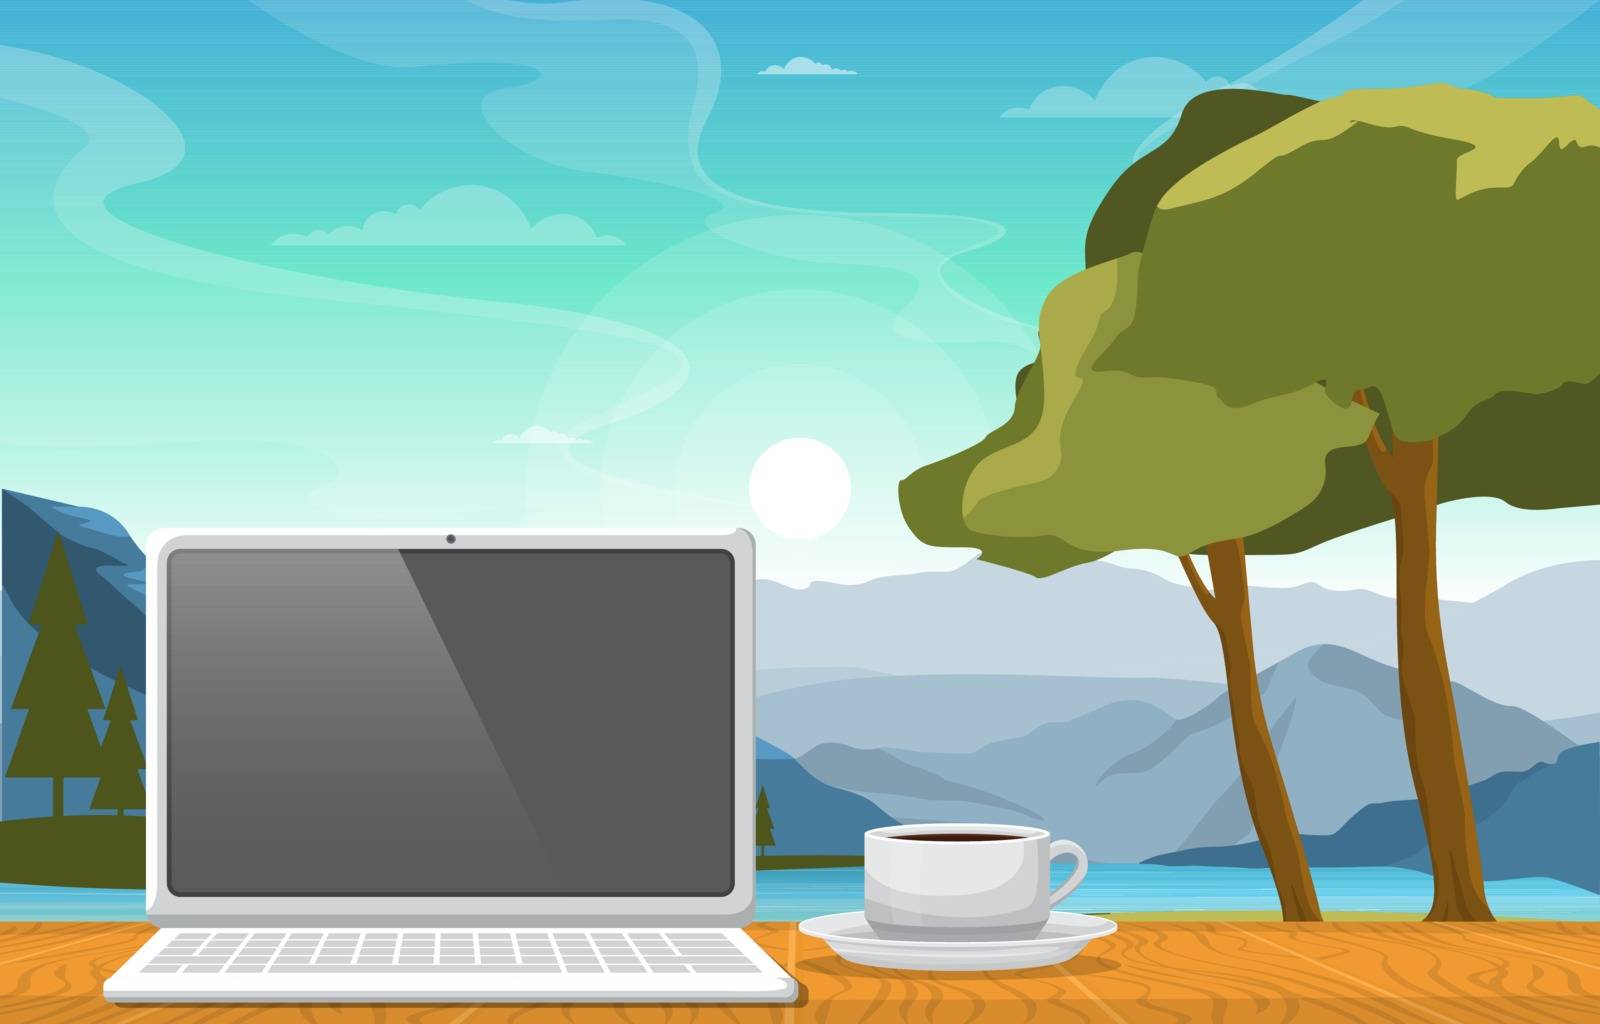 Working with a Cup of Tea on Table in Mountain Lake View Illustration by jongcreative